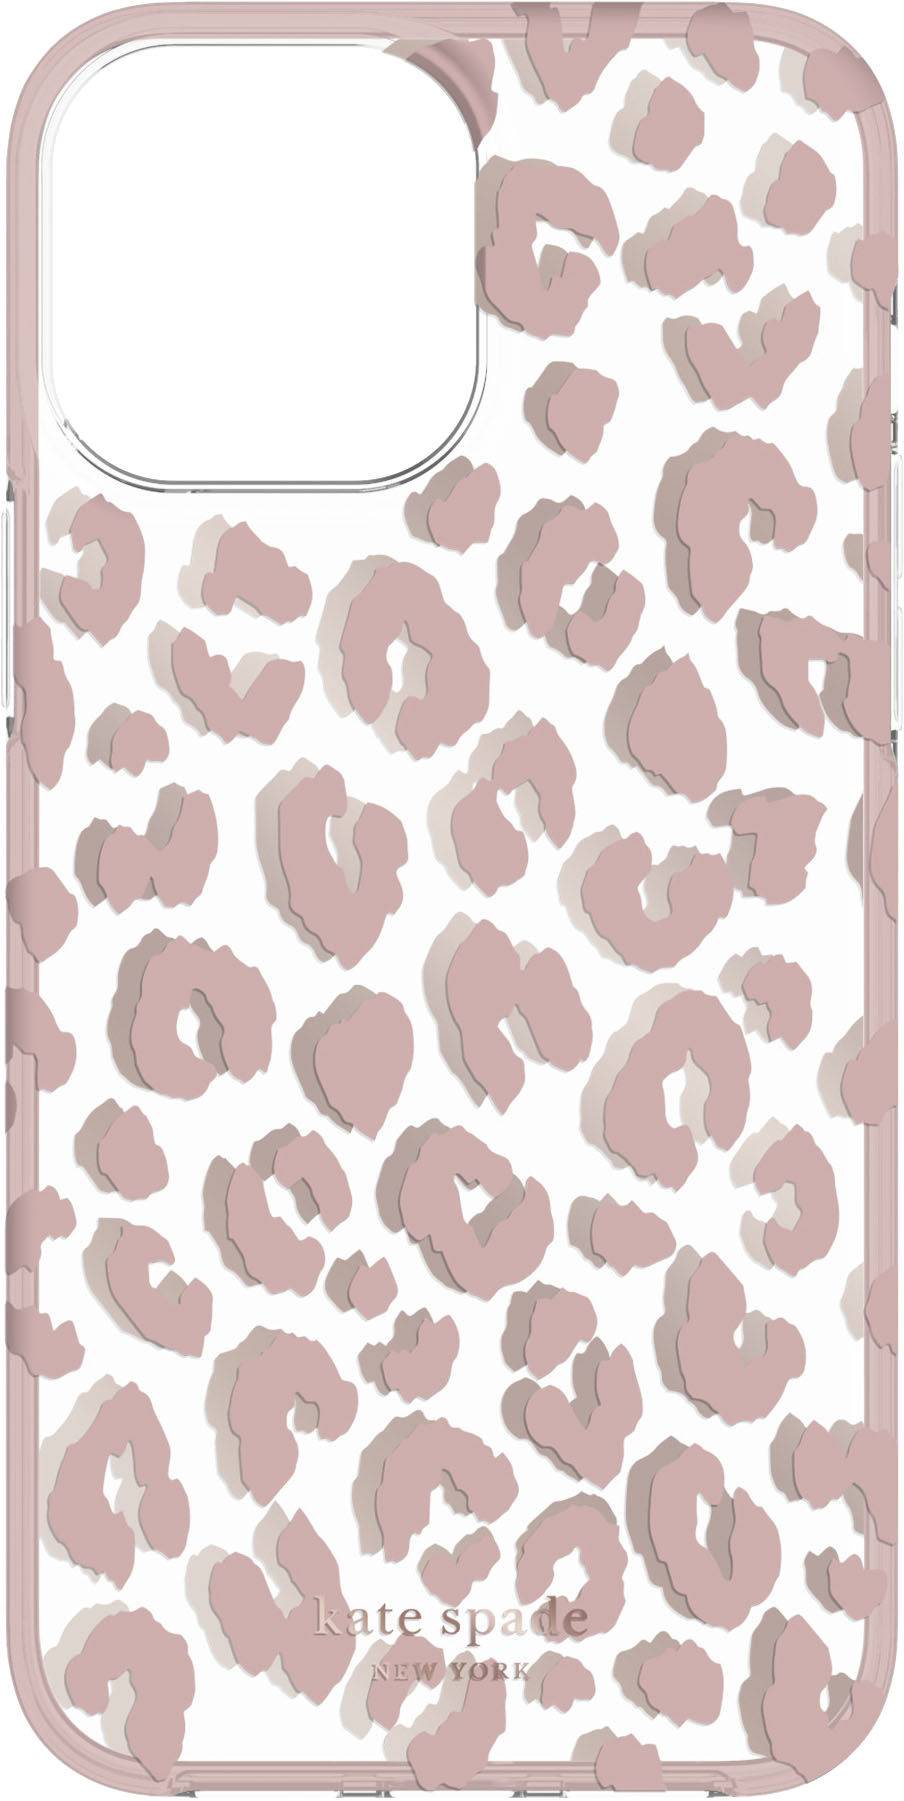 kate spade new york Protective Hardshell Case for iPhone 13/12 Pro Max  Leopard Pink KSIPH-189-CTLP - Best Buy